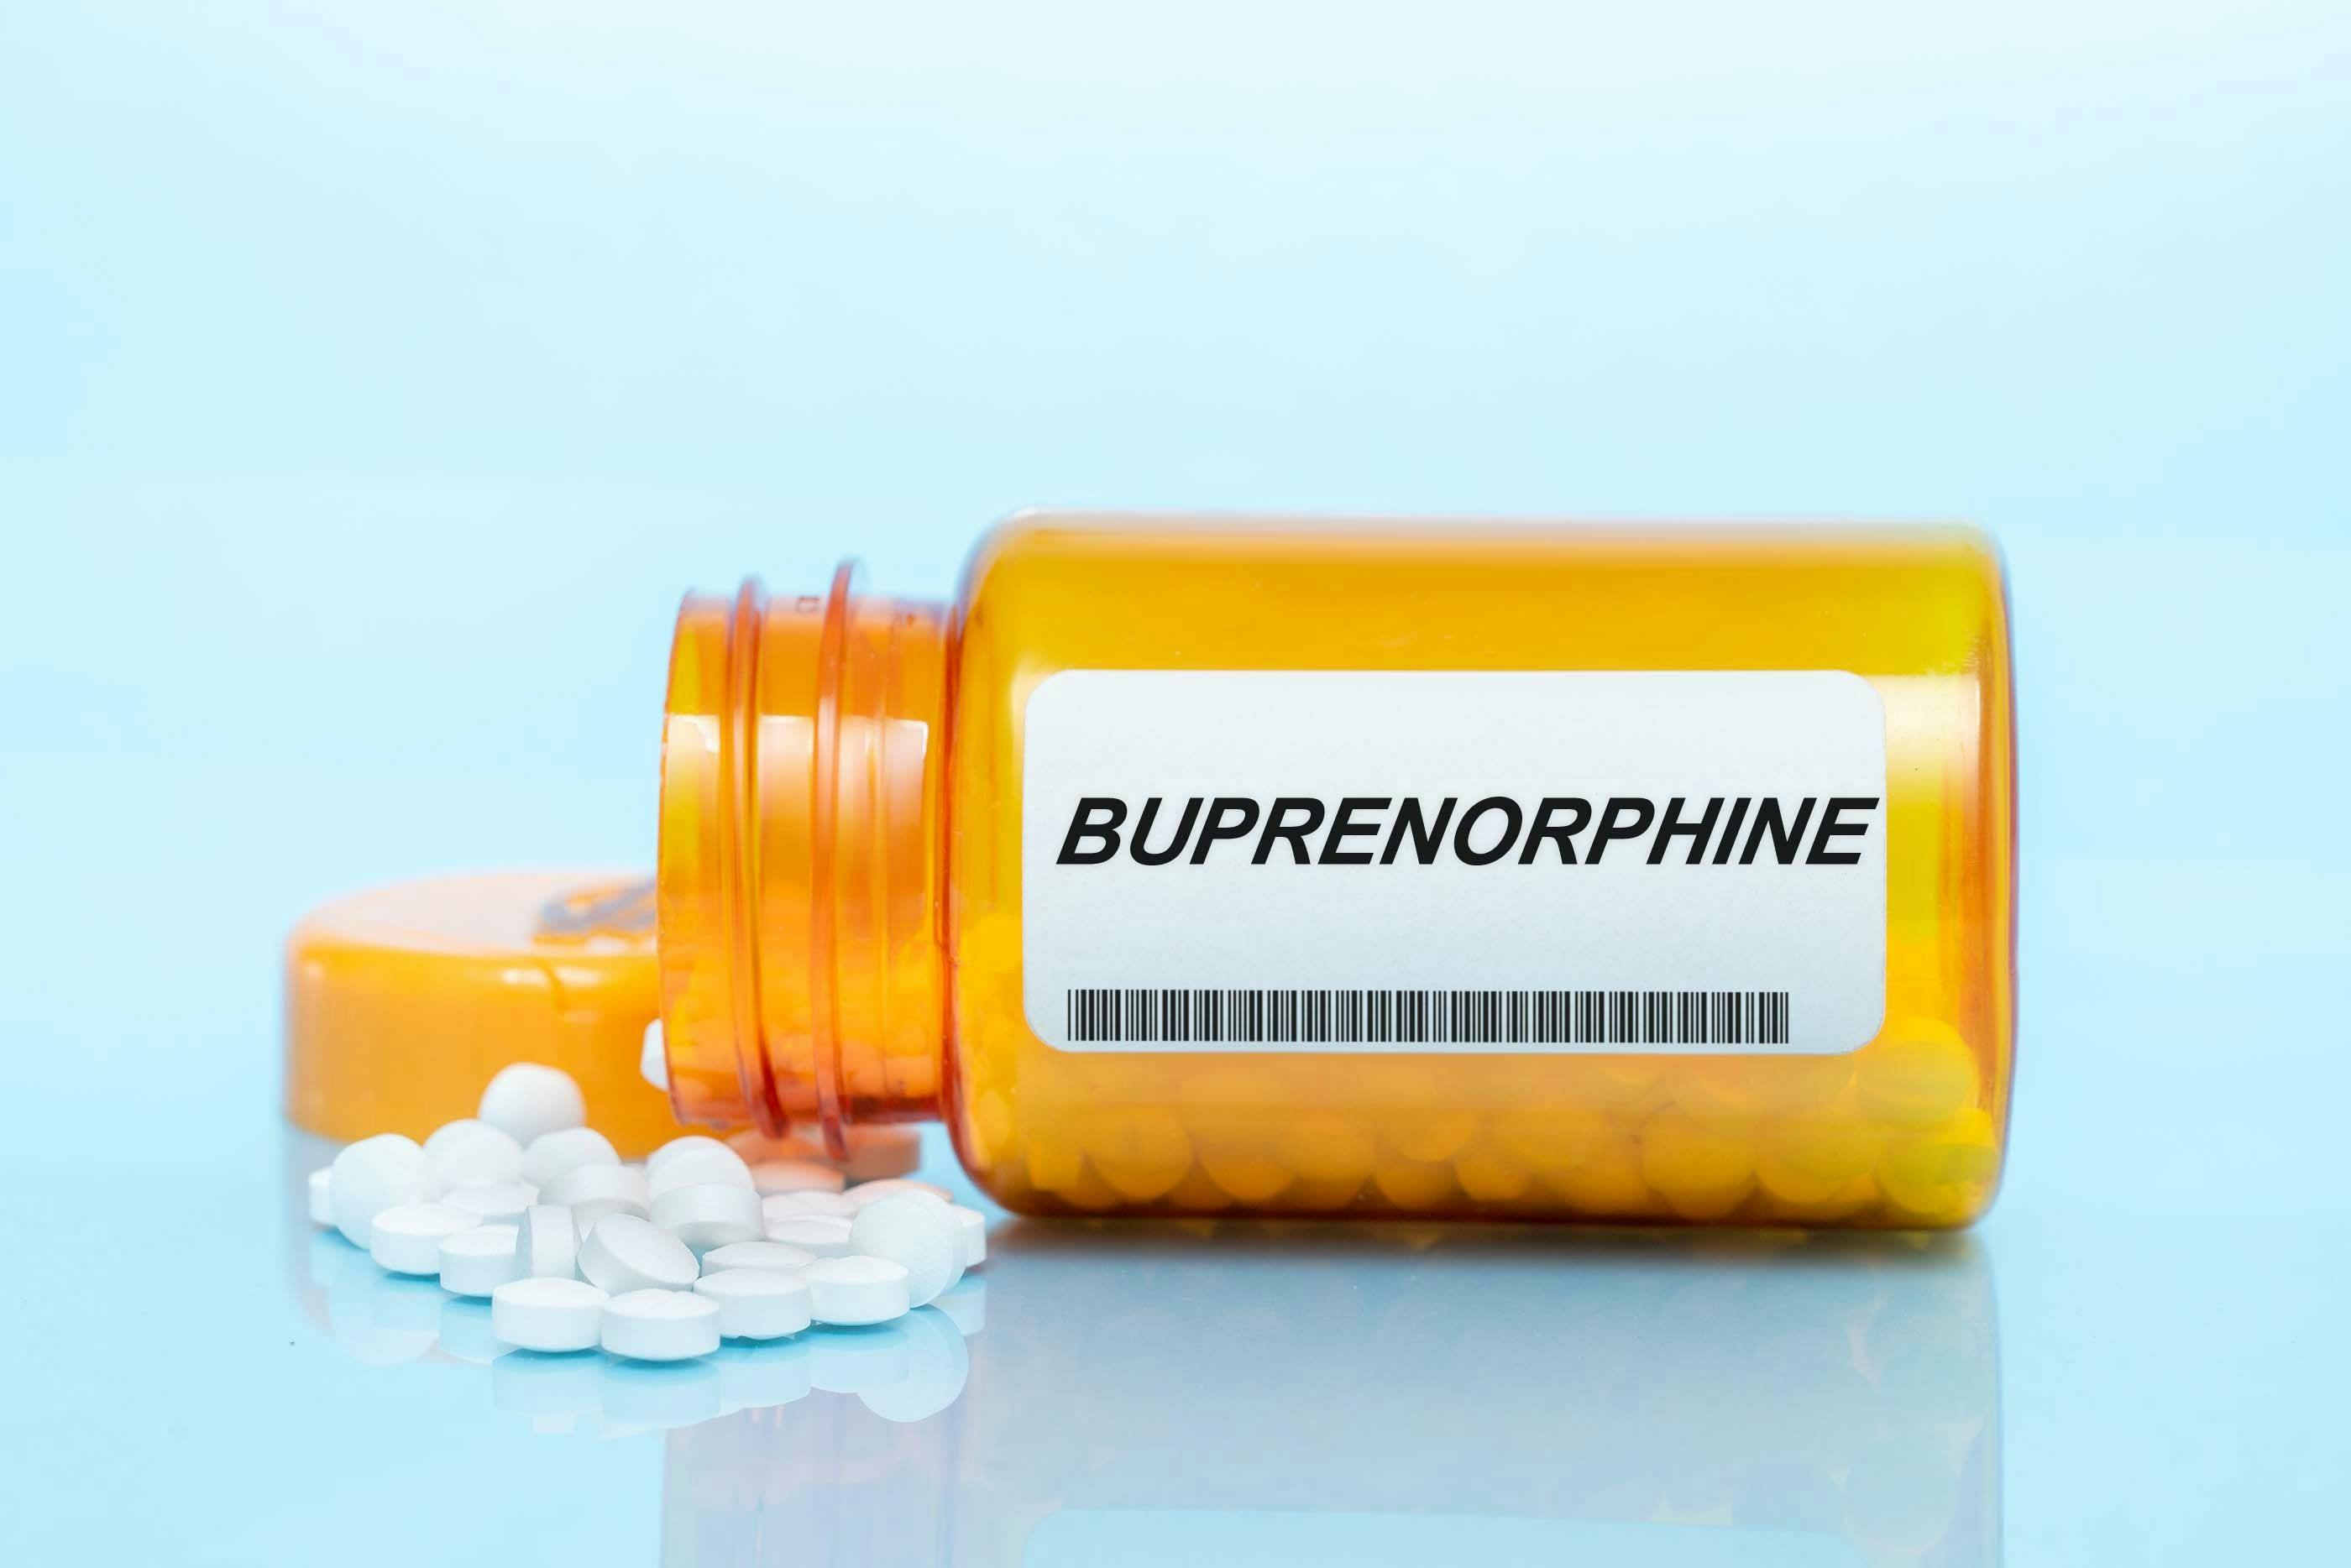 Monthly Buprenorphine Initiation Rates Remain Flat, Despite Policy Changes